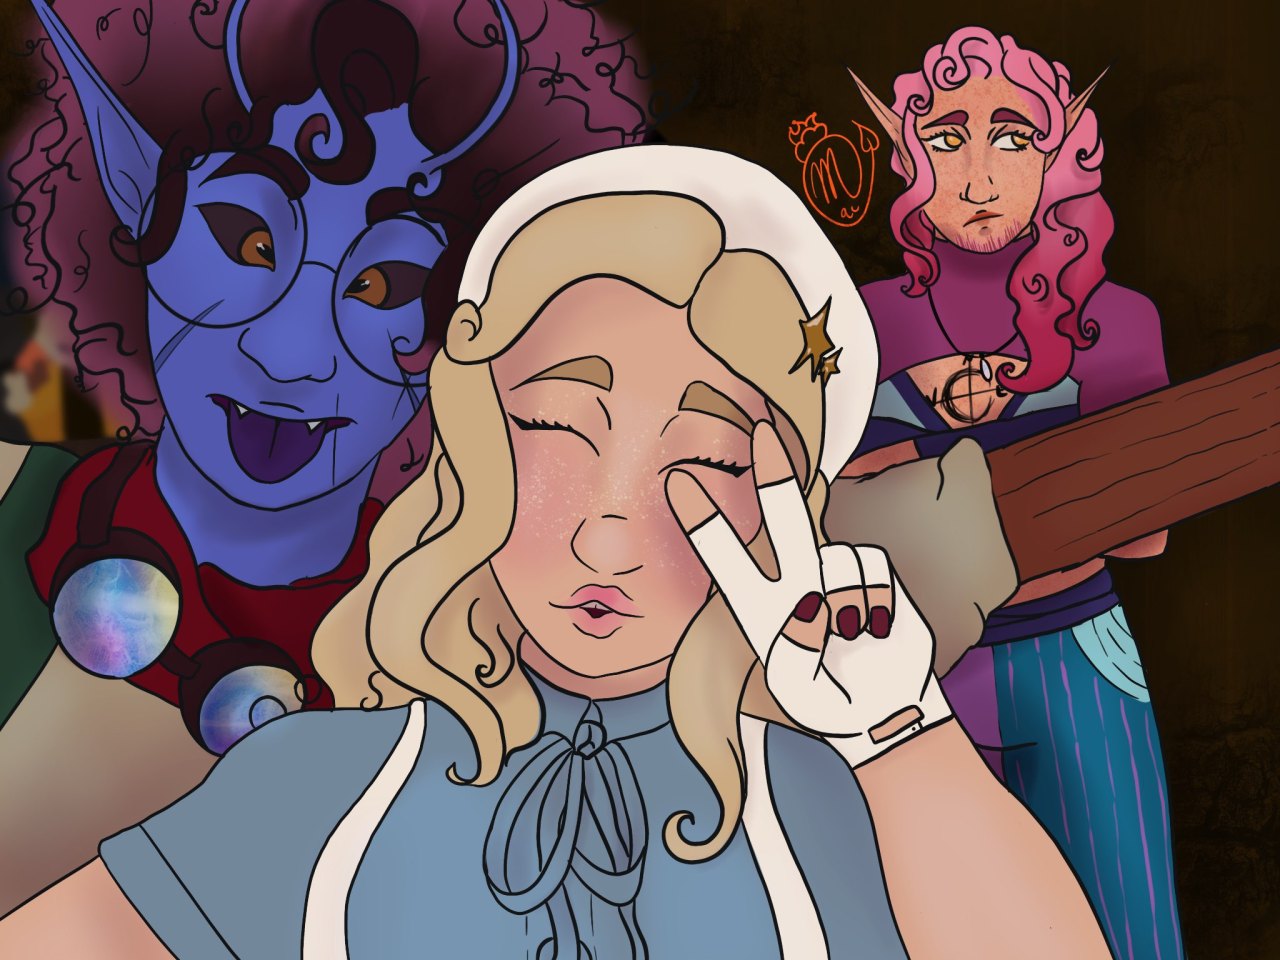 Hey hello we havea podcast. You should listen to it. Here you go.[Image ID:   Art of a selfie of three characters, an insectoid man with purple skin and magenta hair, a young, blonde human woman, and a pink haired elven person. The human woman is holding the camera, doing a peace sign, and the insectoid man is smiling behind her. In the background, the elven person has his arms crossed and is looking off to the side, slightly annoyed. End ID.] #dnd#dnd podcast#ttrpg#ttrpg podcast #mercenaries in retrograde #mercenaries pod#celeste tourmalia#algernon heart#simmon petaldae#disabled character #trans people making stuff #disabled representation#dnd art#dnd character#podcast#spotify #this is our official account by the way  #exciting times yall